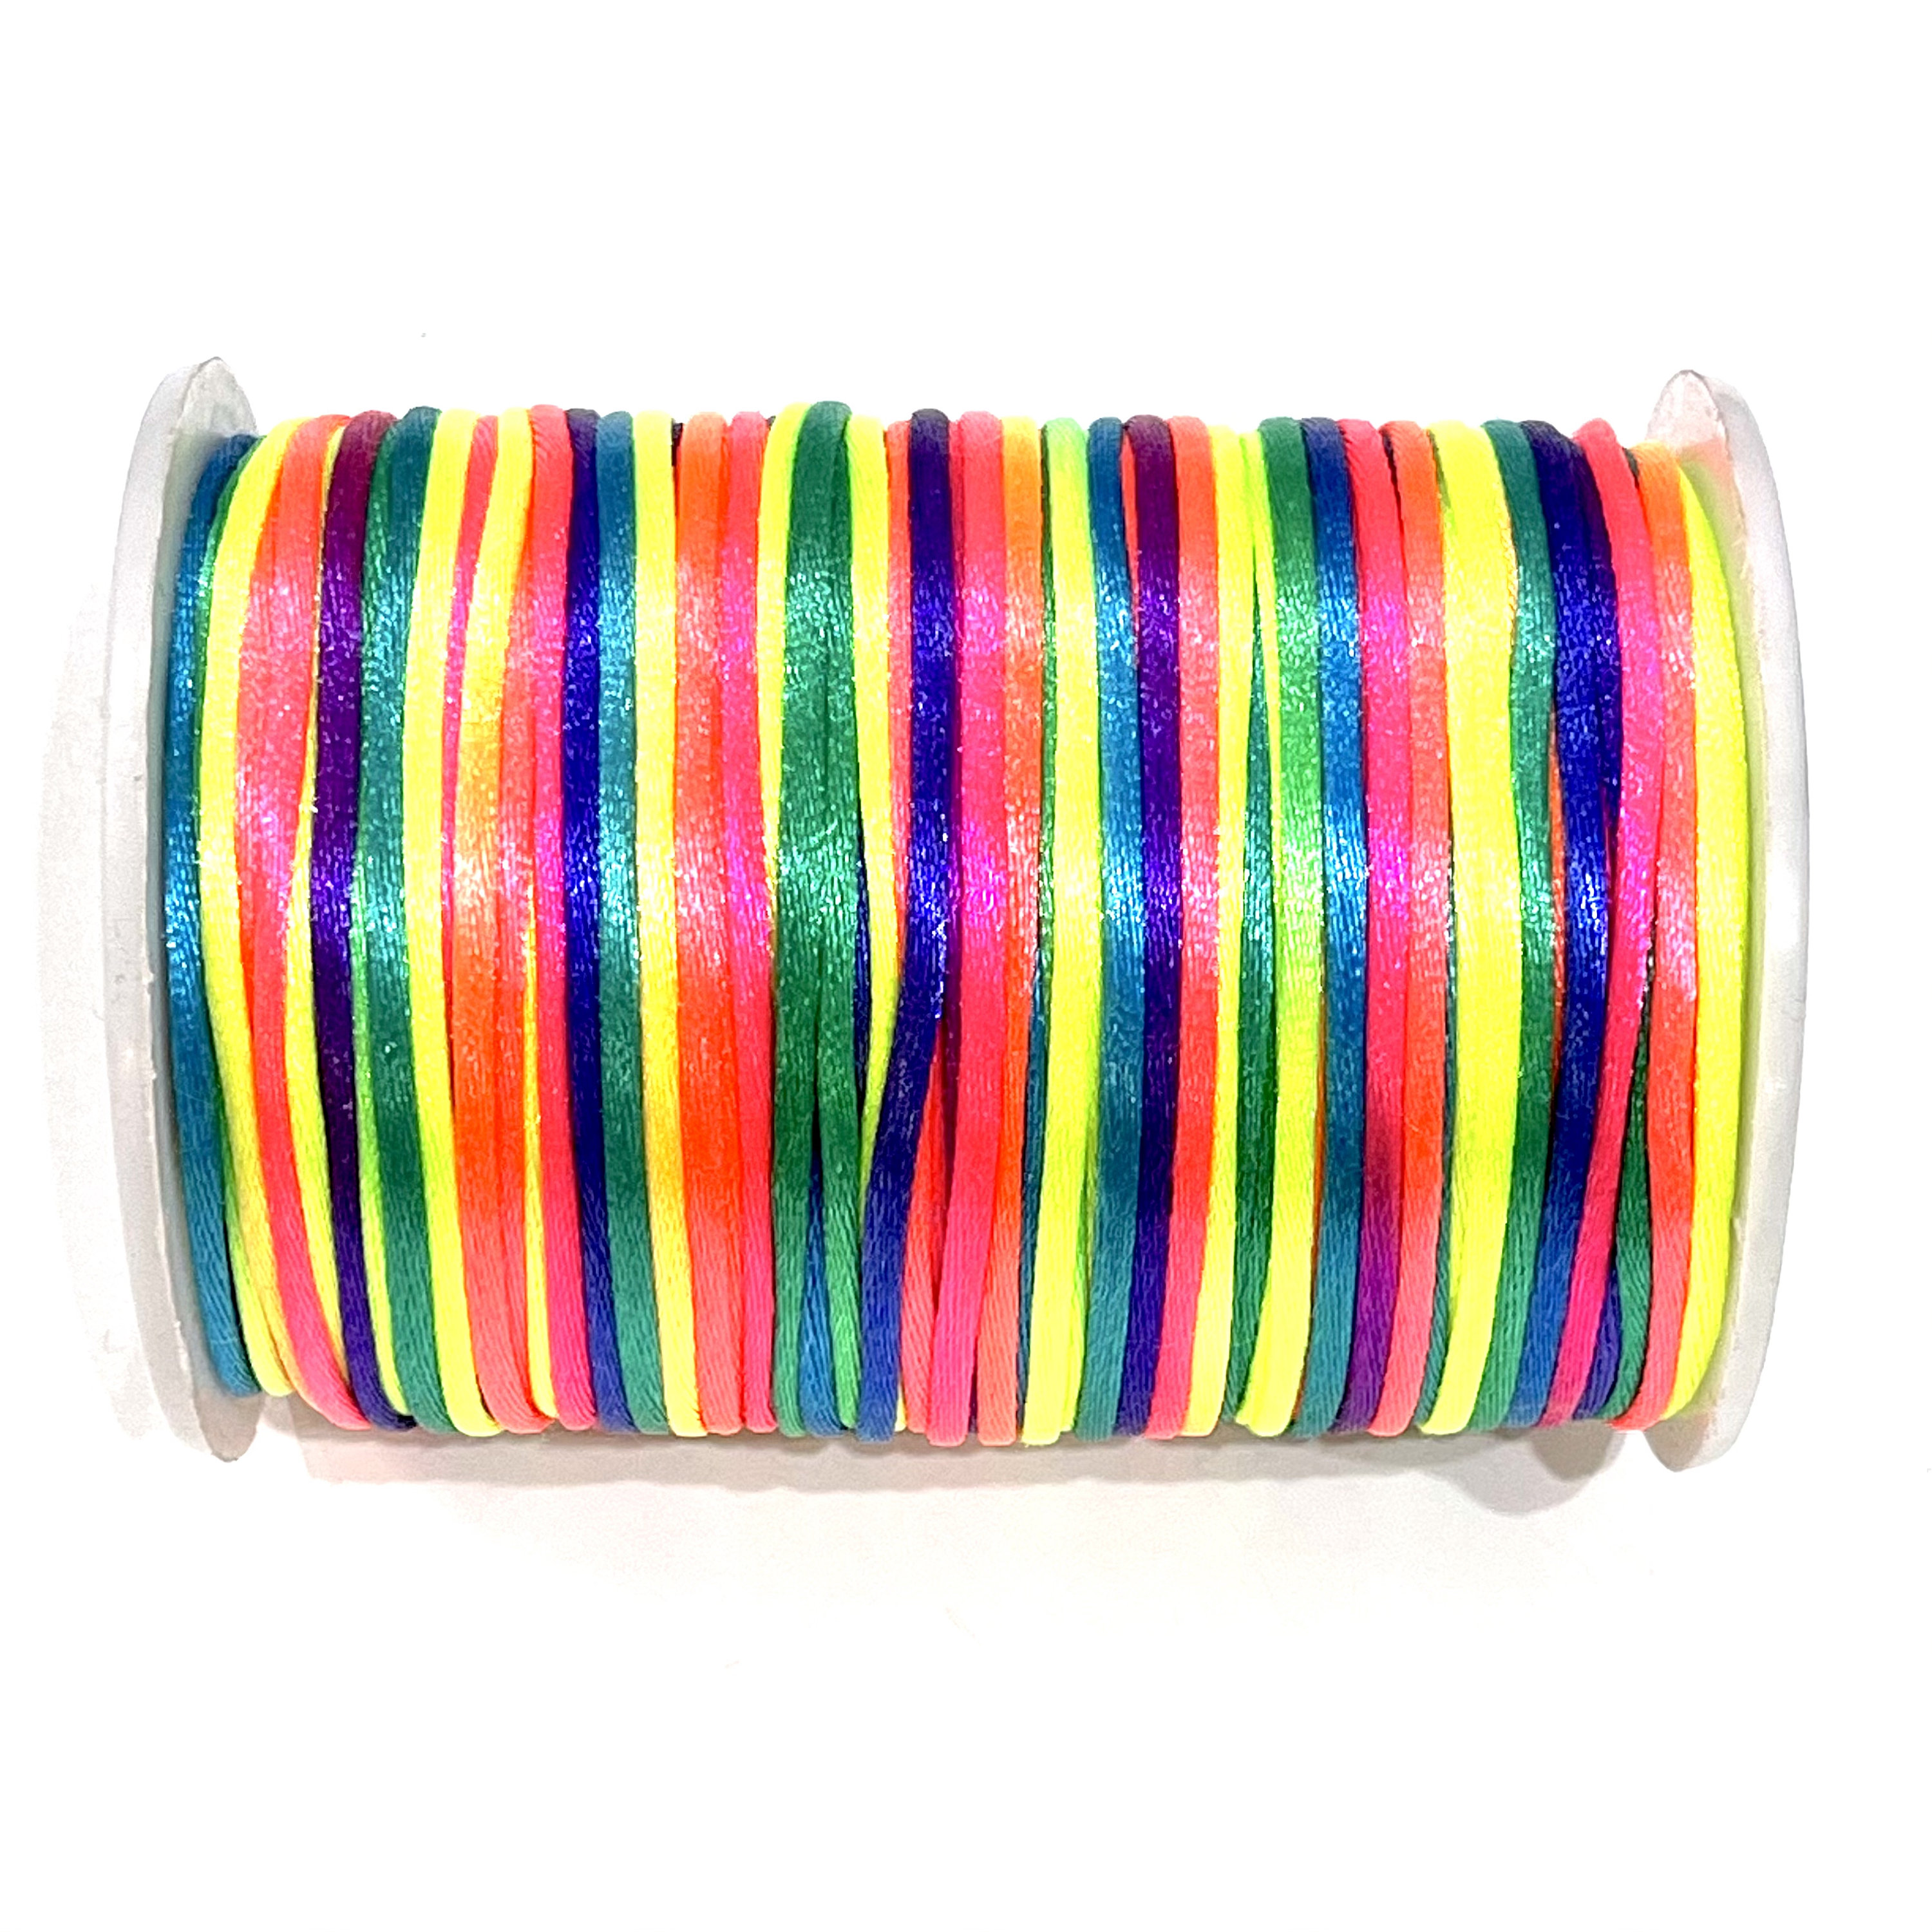 2mm Satin Nylon Cord 13 Colors for all your jewelry making